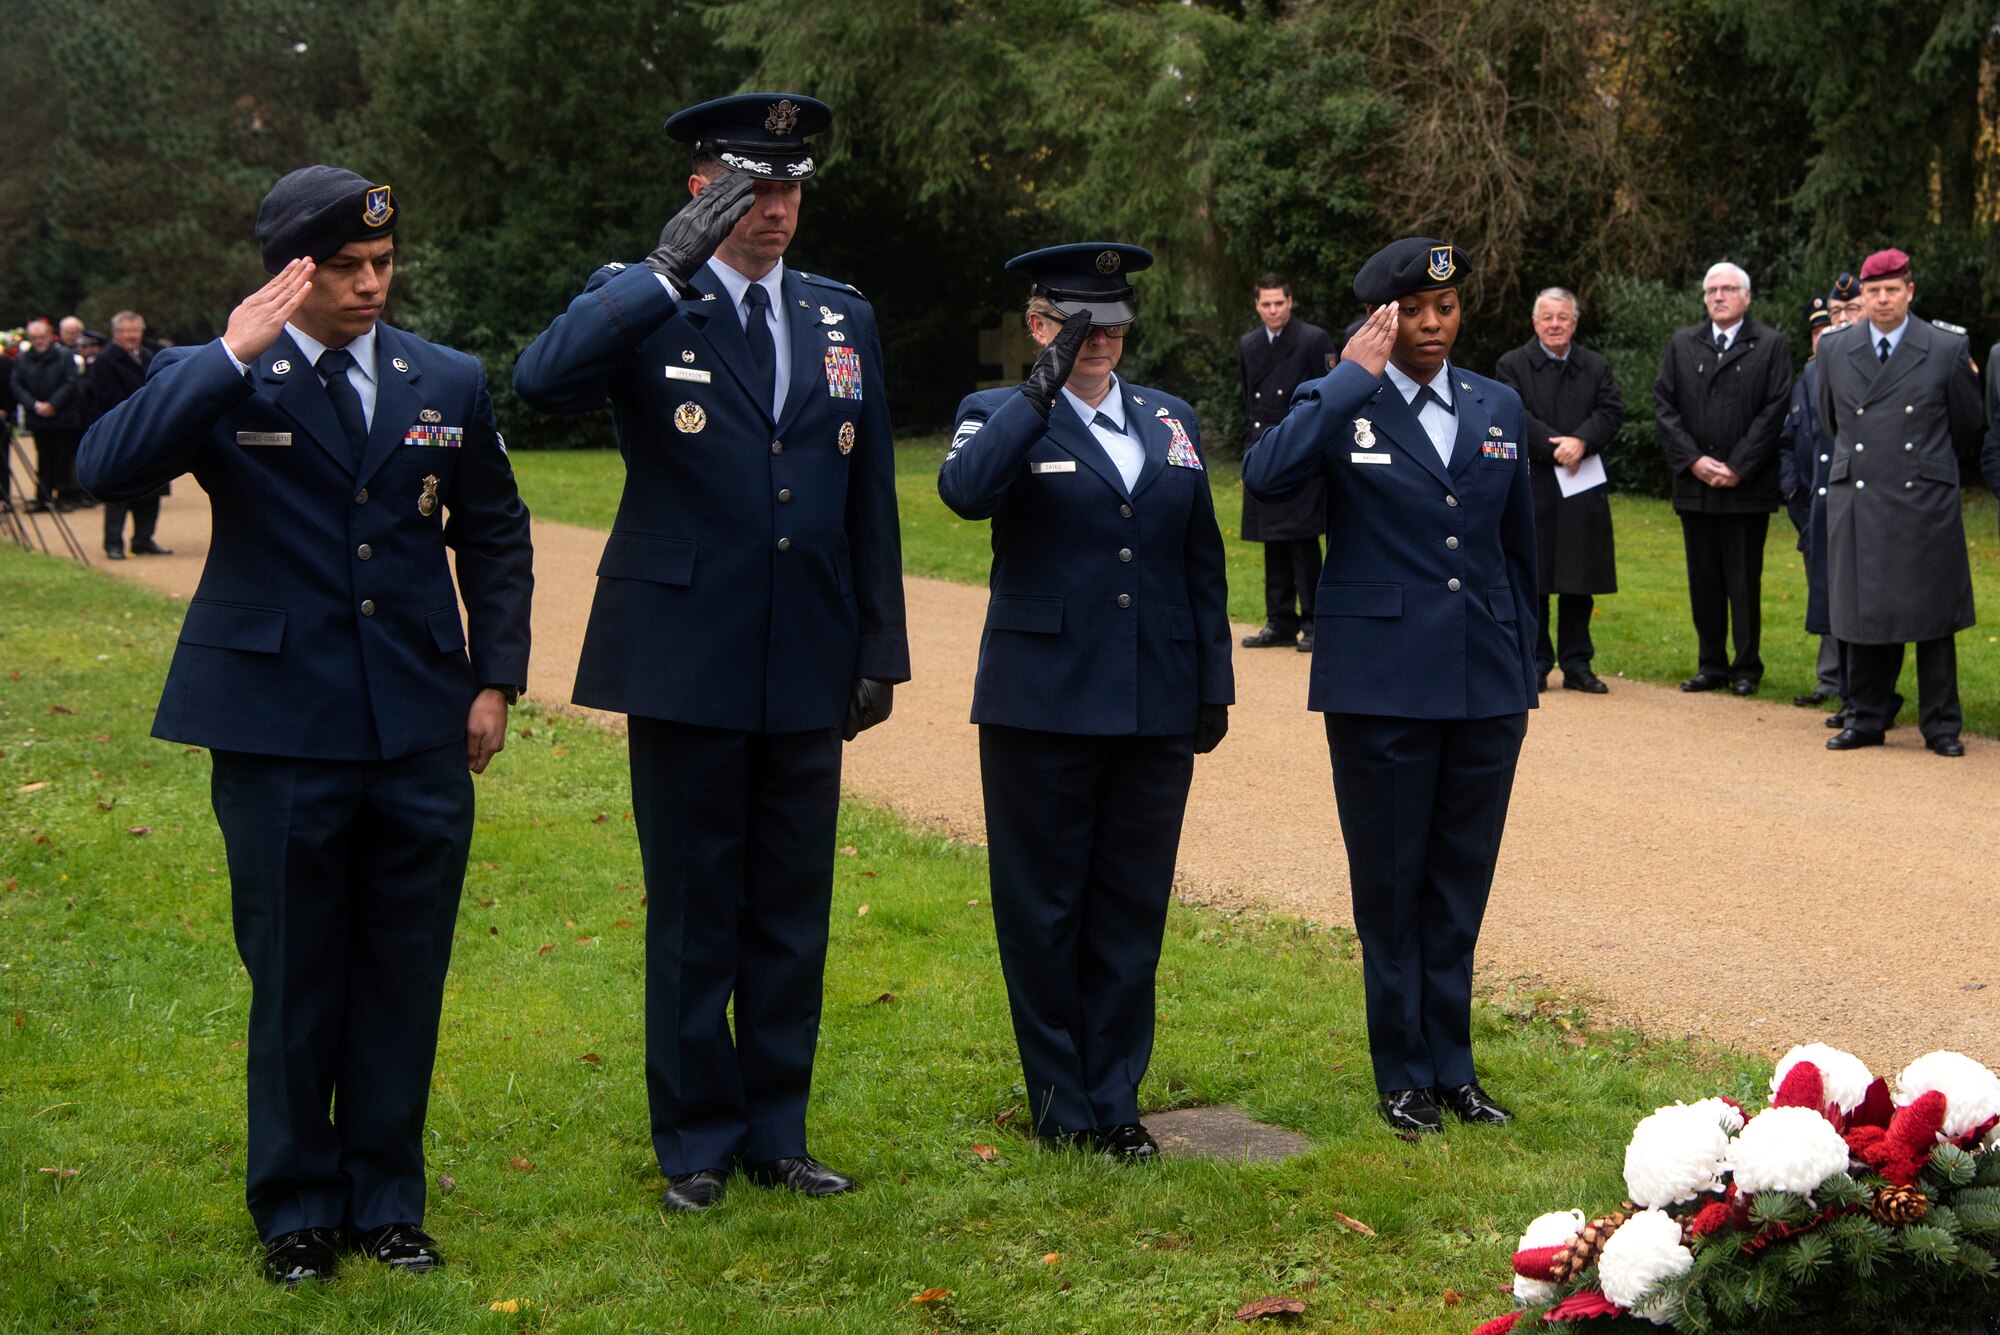 U.S. Air Force Col. David Epperson, 52nd Fighter Wing commander, center left, Chief Master Sgt. Stephanie Cates, 52nd FW command chief, center right, and Airmen from the 52nd Security Forces Squadron, render a salute in front of a memorial during the German National Day of Mourning ceremony at the Trier cemetery in Trier, Germany, Nov. 17, 2019. The 52nd SFS members laid a wreath at the base of the memorial. The annual ceremony honors victims of war and tyranny. (U.S. Air Force photo by Airman 1st Class Valerie Seelye)